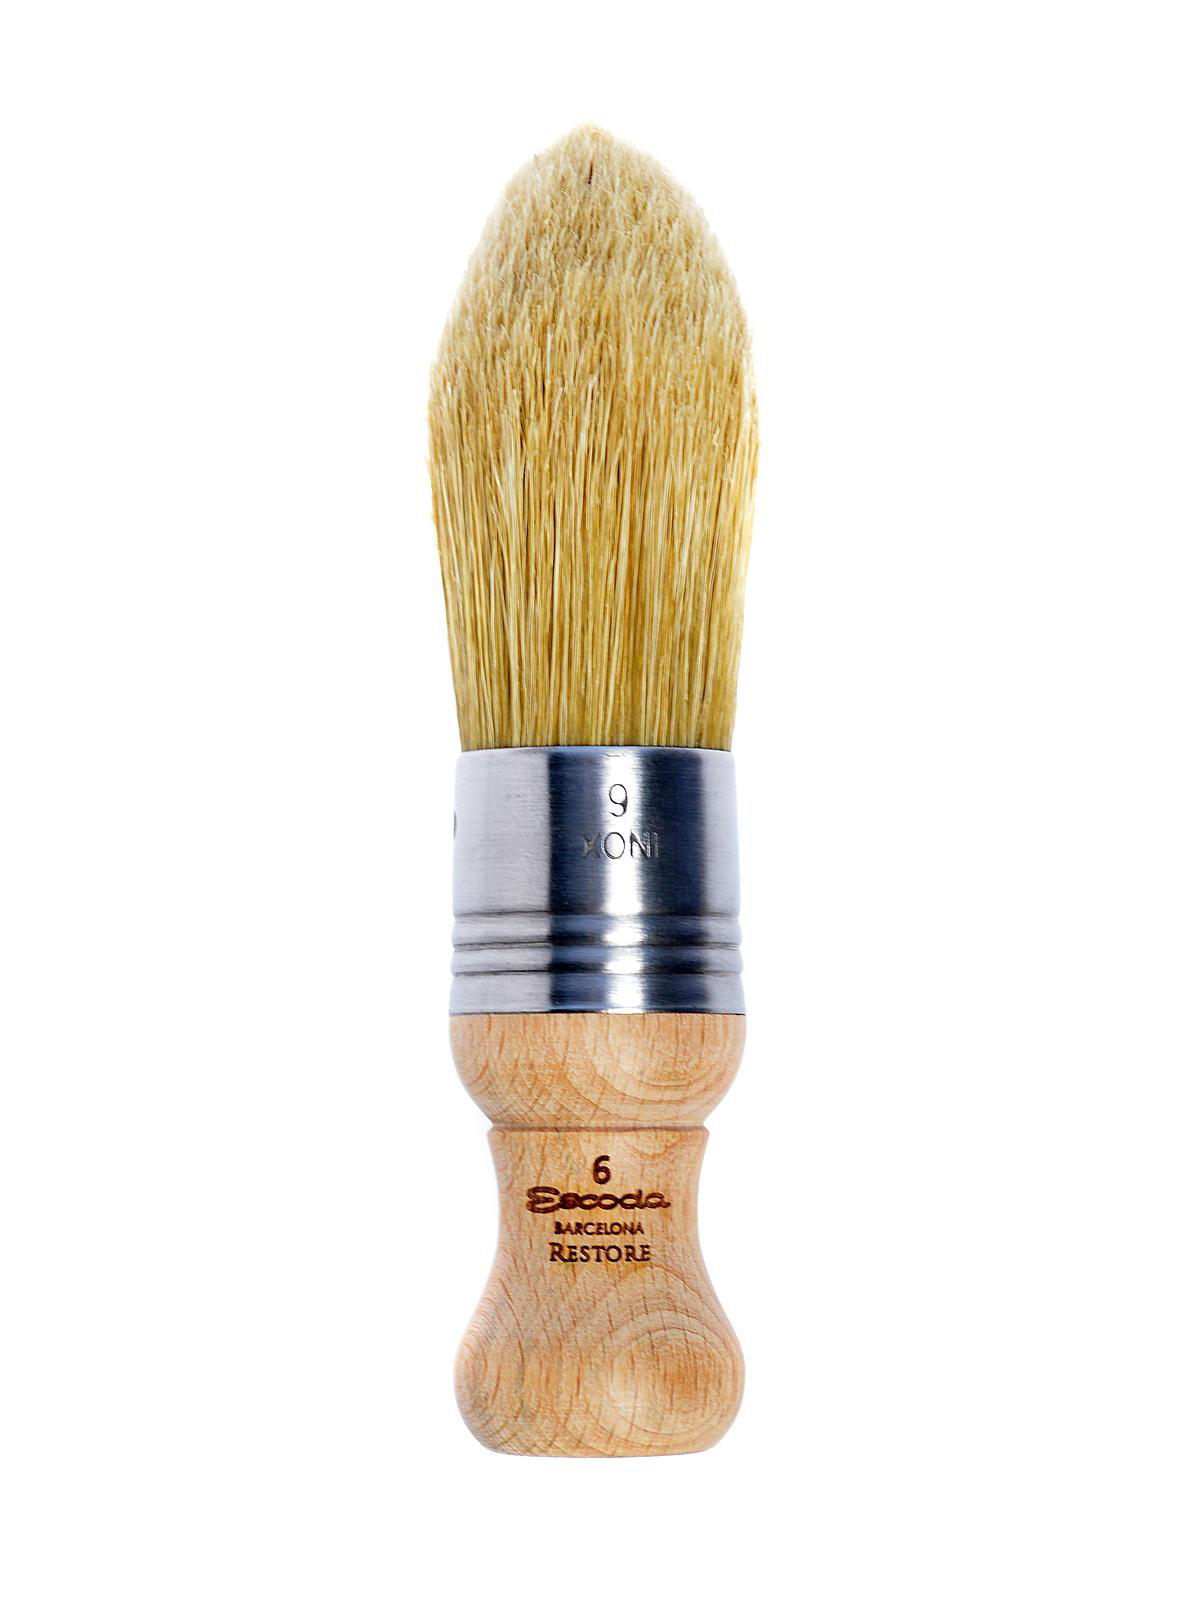 Restore Flat Wax Brush by Escoda Series 7701 - Brushes and More